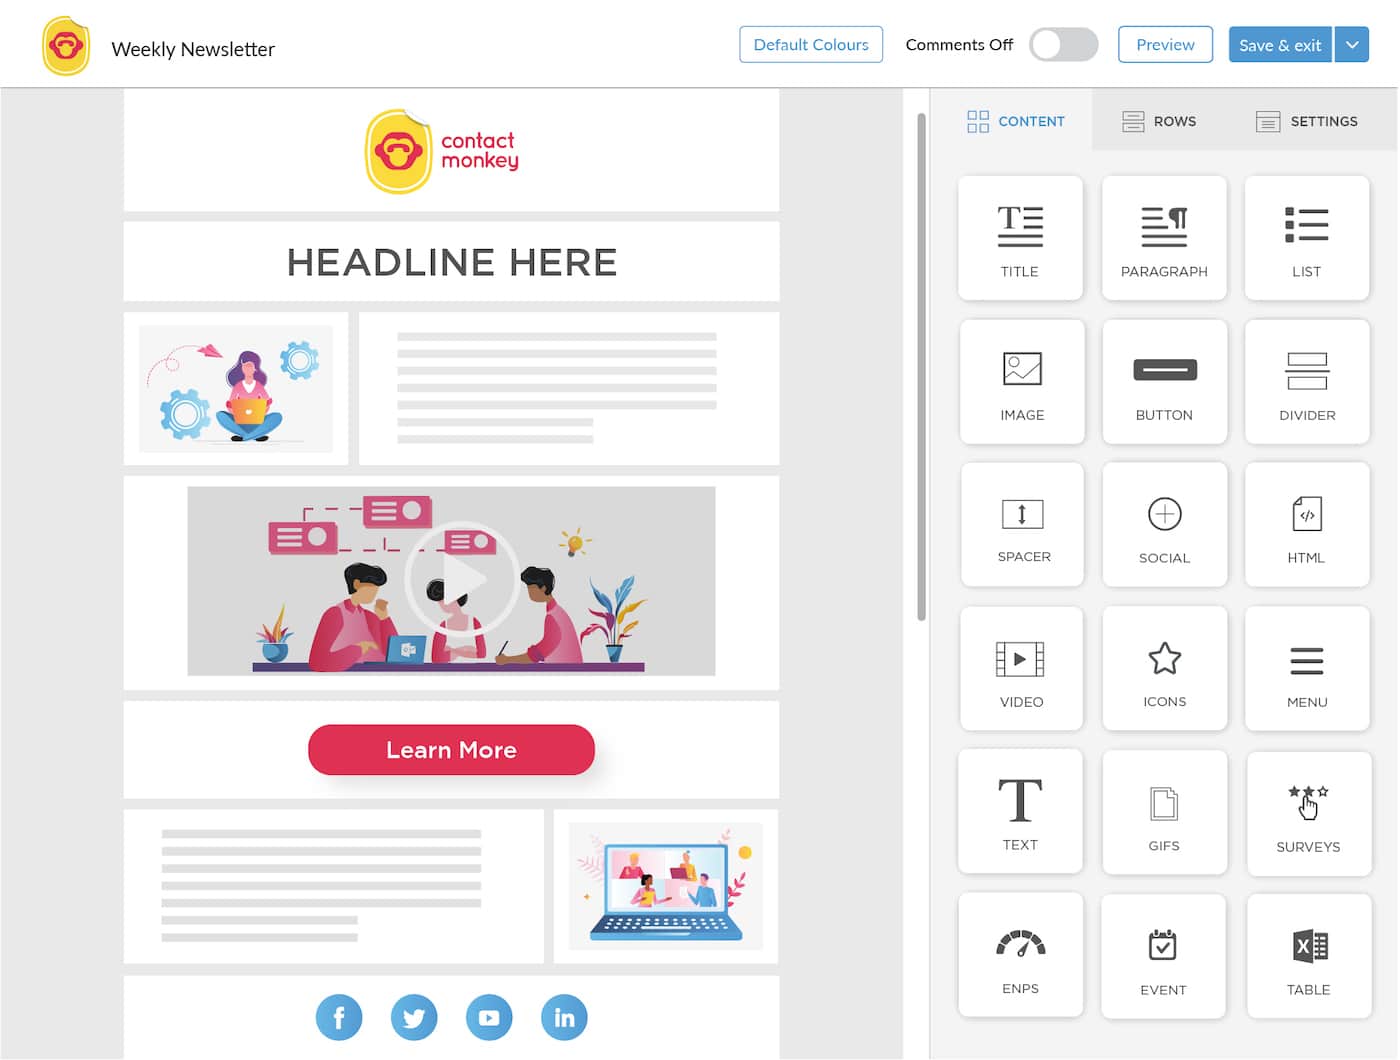 An example of a newsletter being built with ContactMonkey's email template builder.